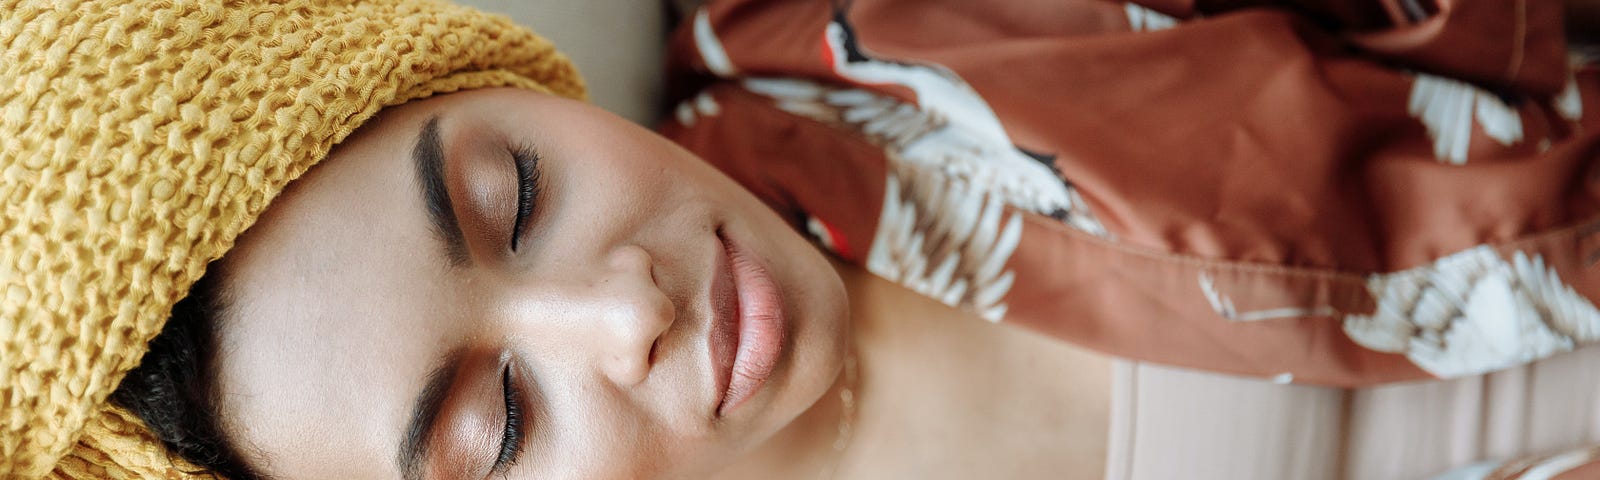 A woman with a headwrap on and a robe is laying on the couch with her eyes closed.